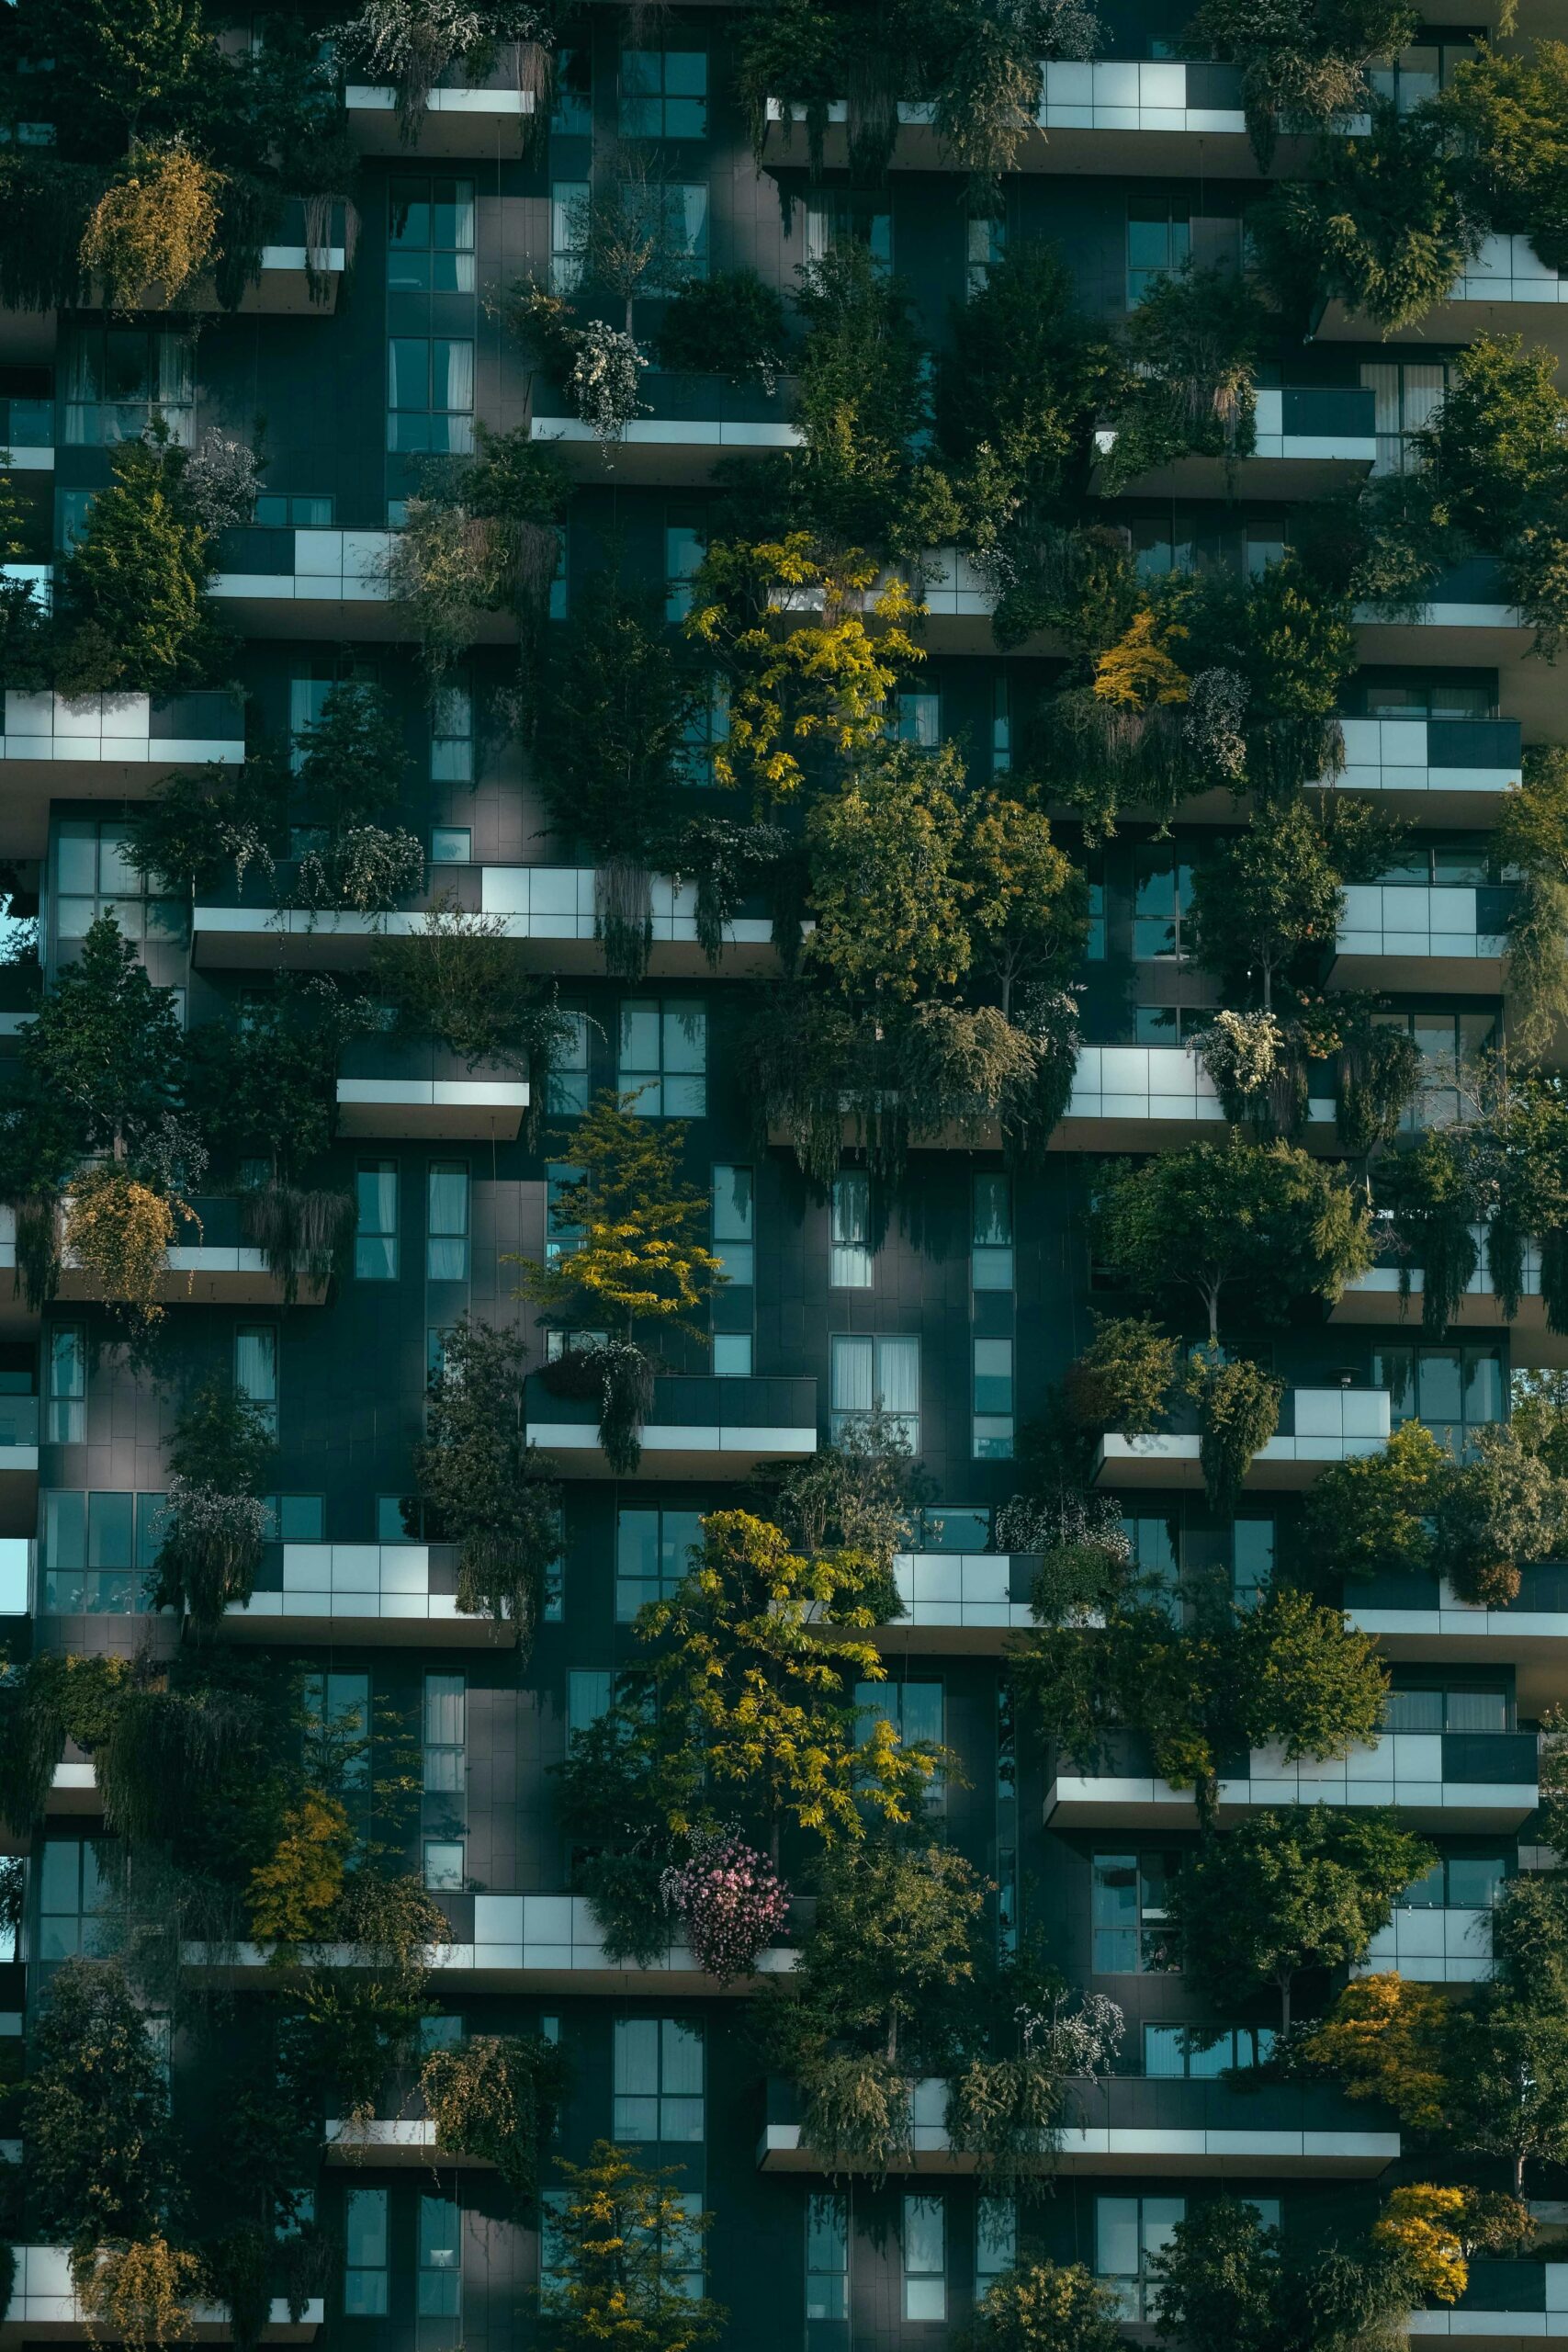 Photo by Francesco Ungaro: https://www.pexels.com/photo/modern-residential-building-facade-decorated-with-green-plants-4322027/